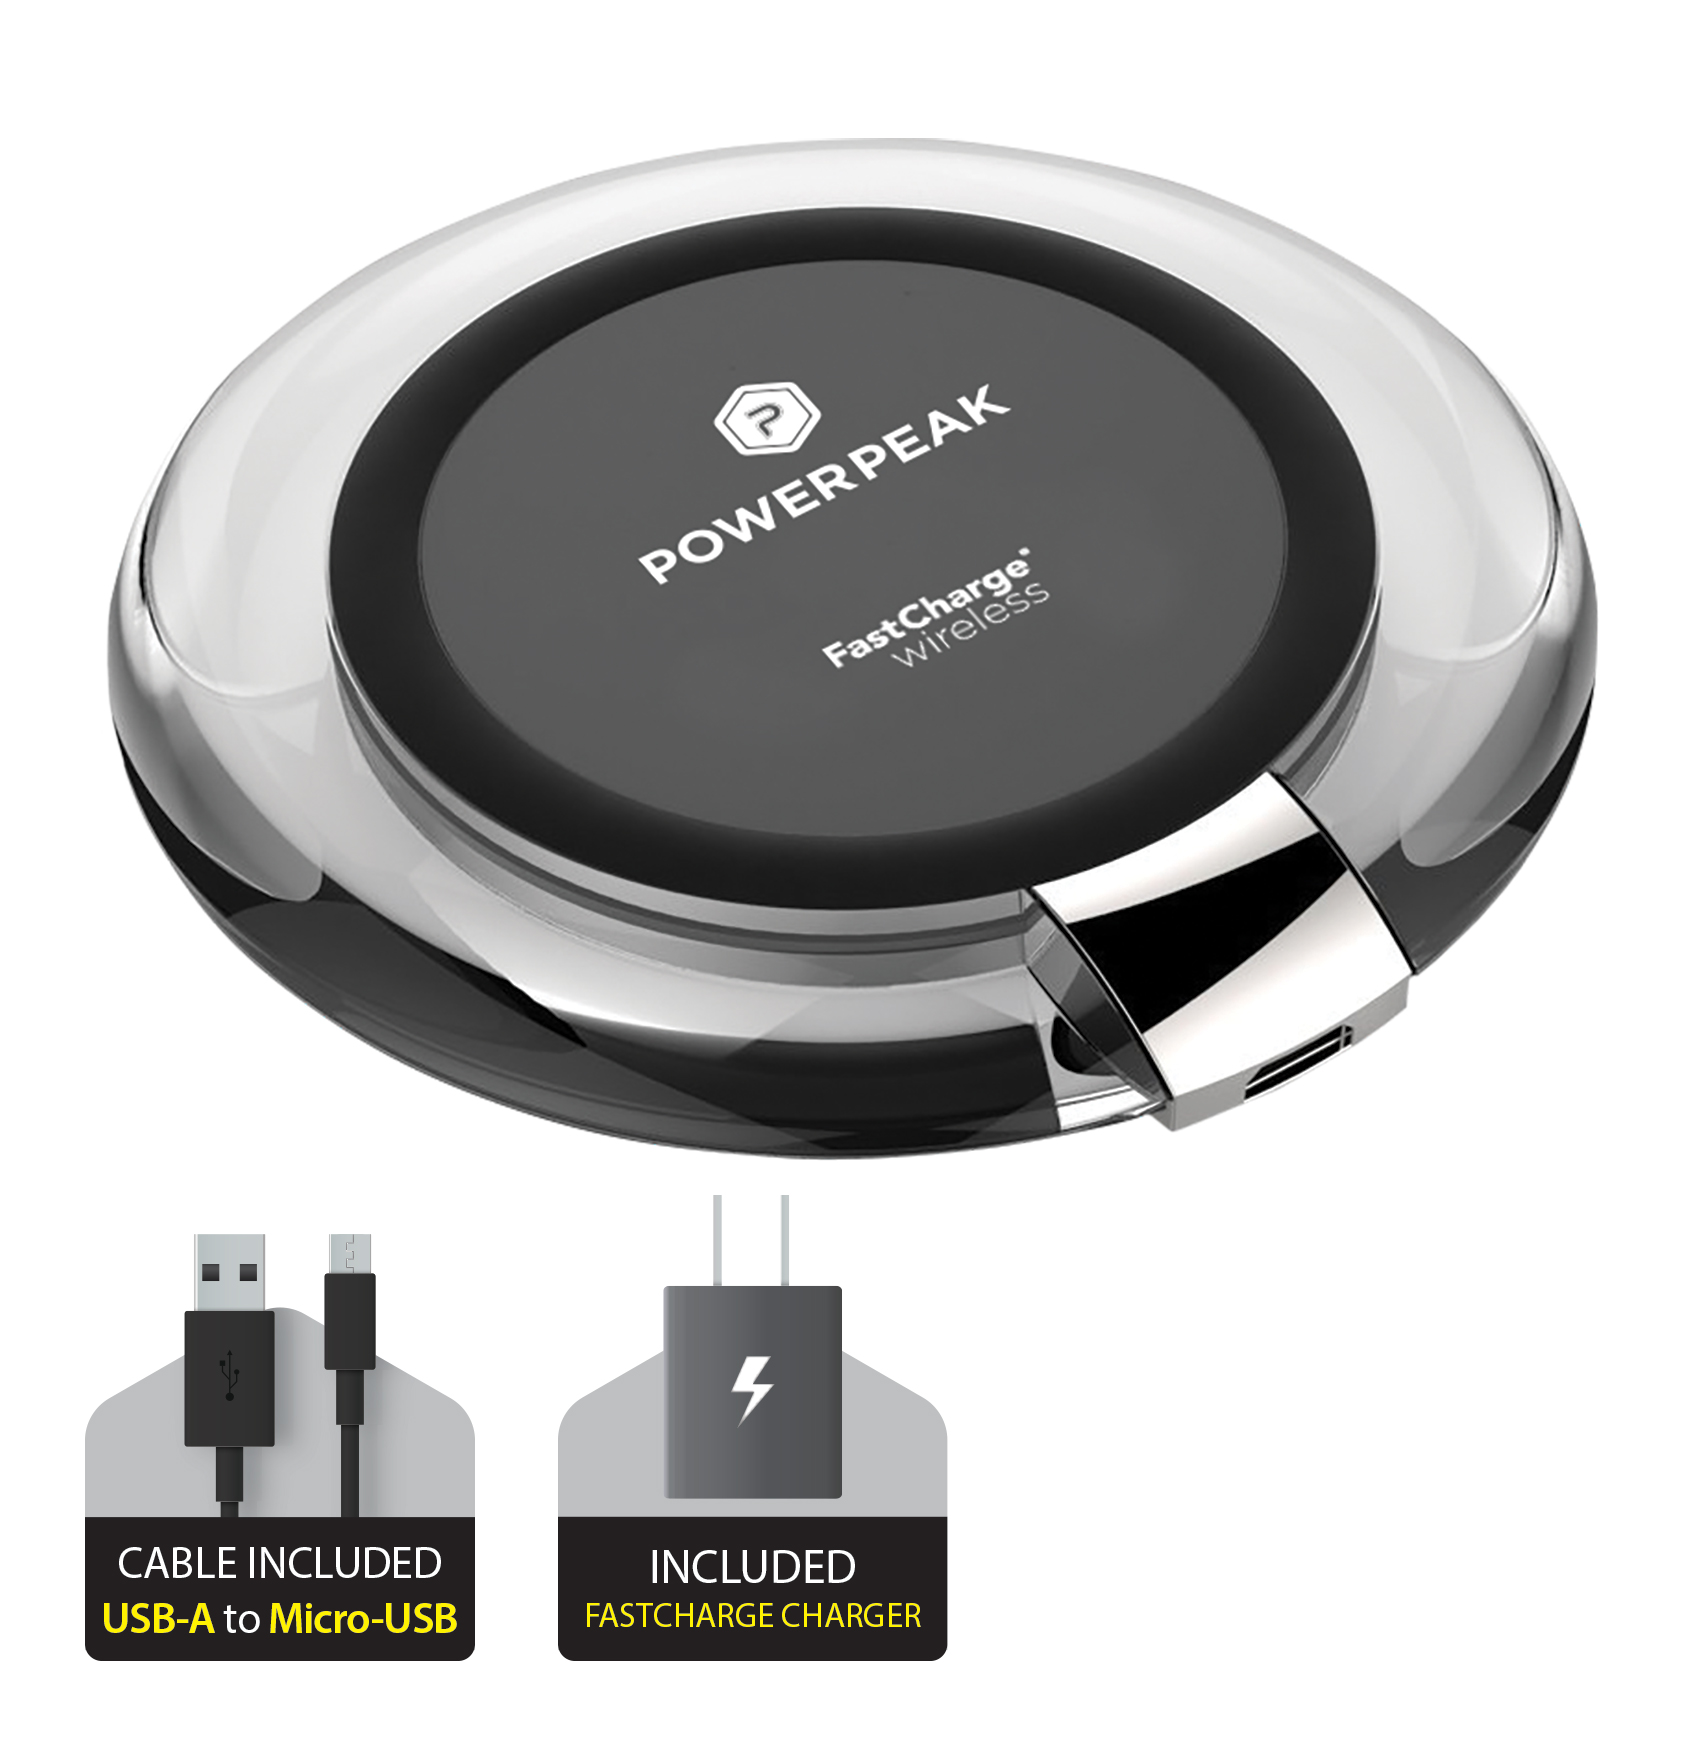 Aluminum Wireless Fast Charging Circle Pad for Qi-Compatible Devices with Black USB-A to Micro-USB cable and adapter